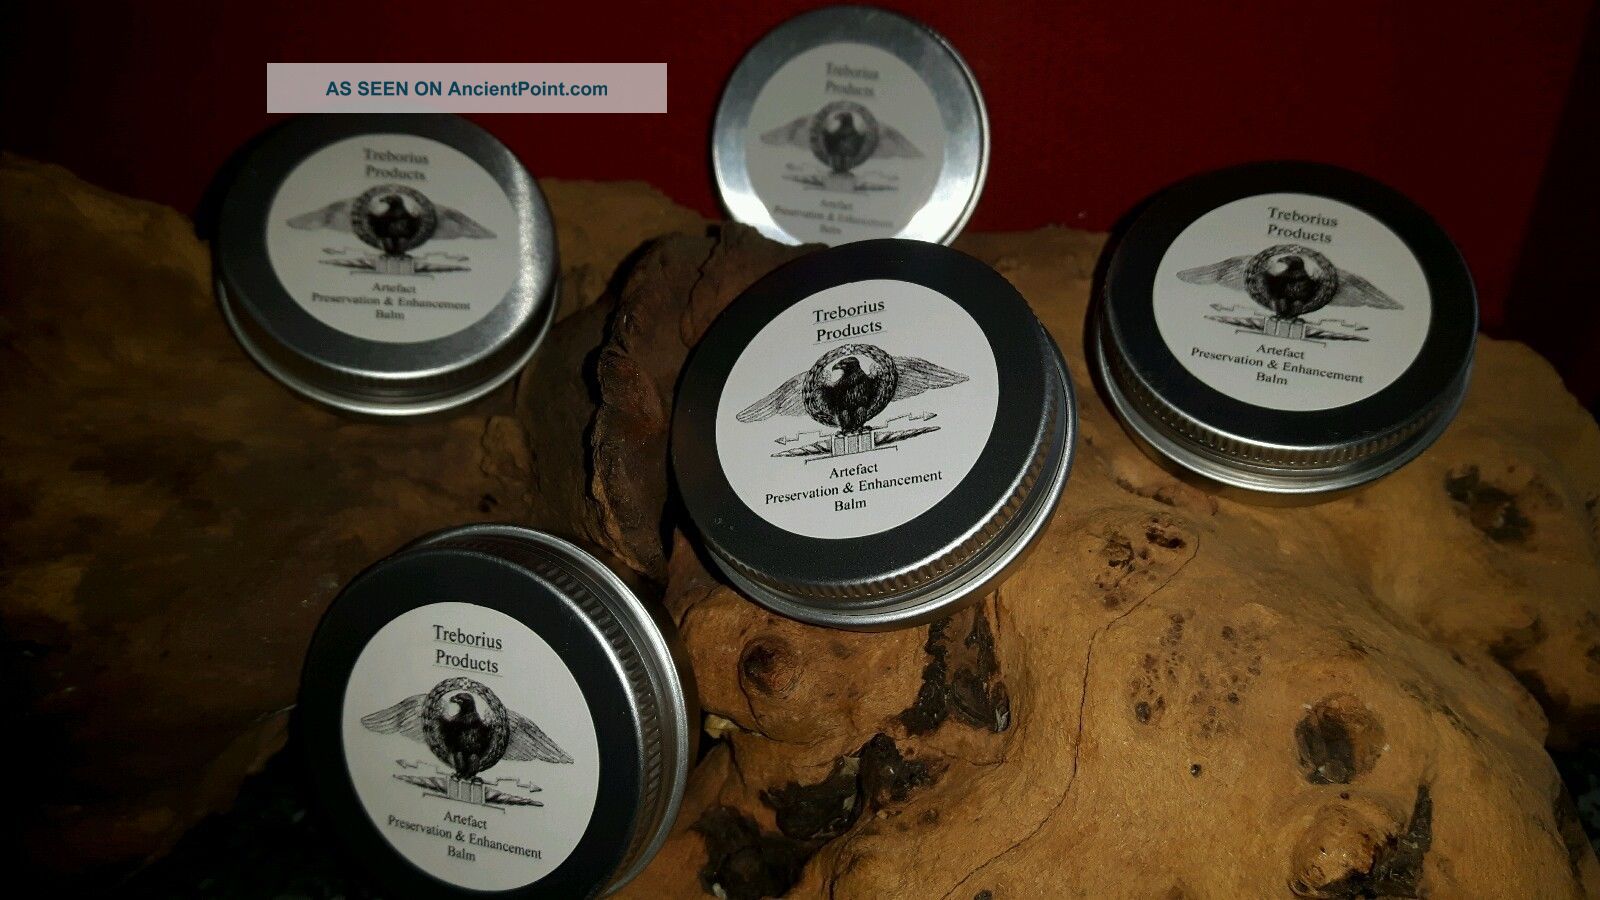 Treborius Artifact Preservation And Enhancement Balm for metal detecting finds 